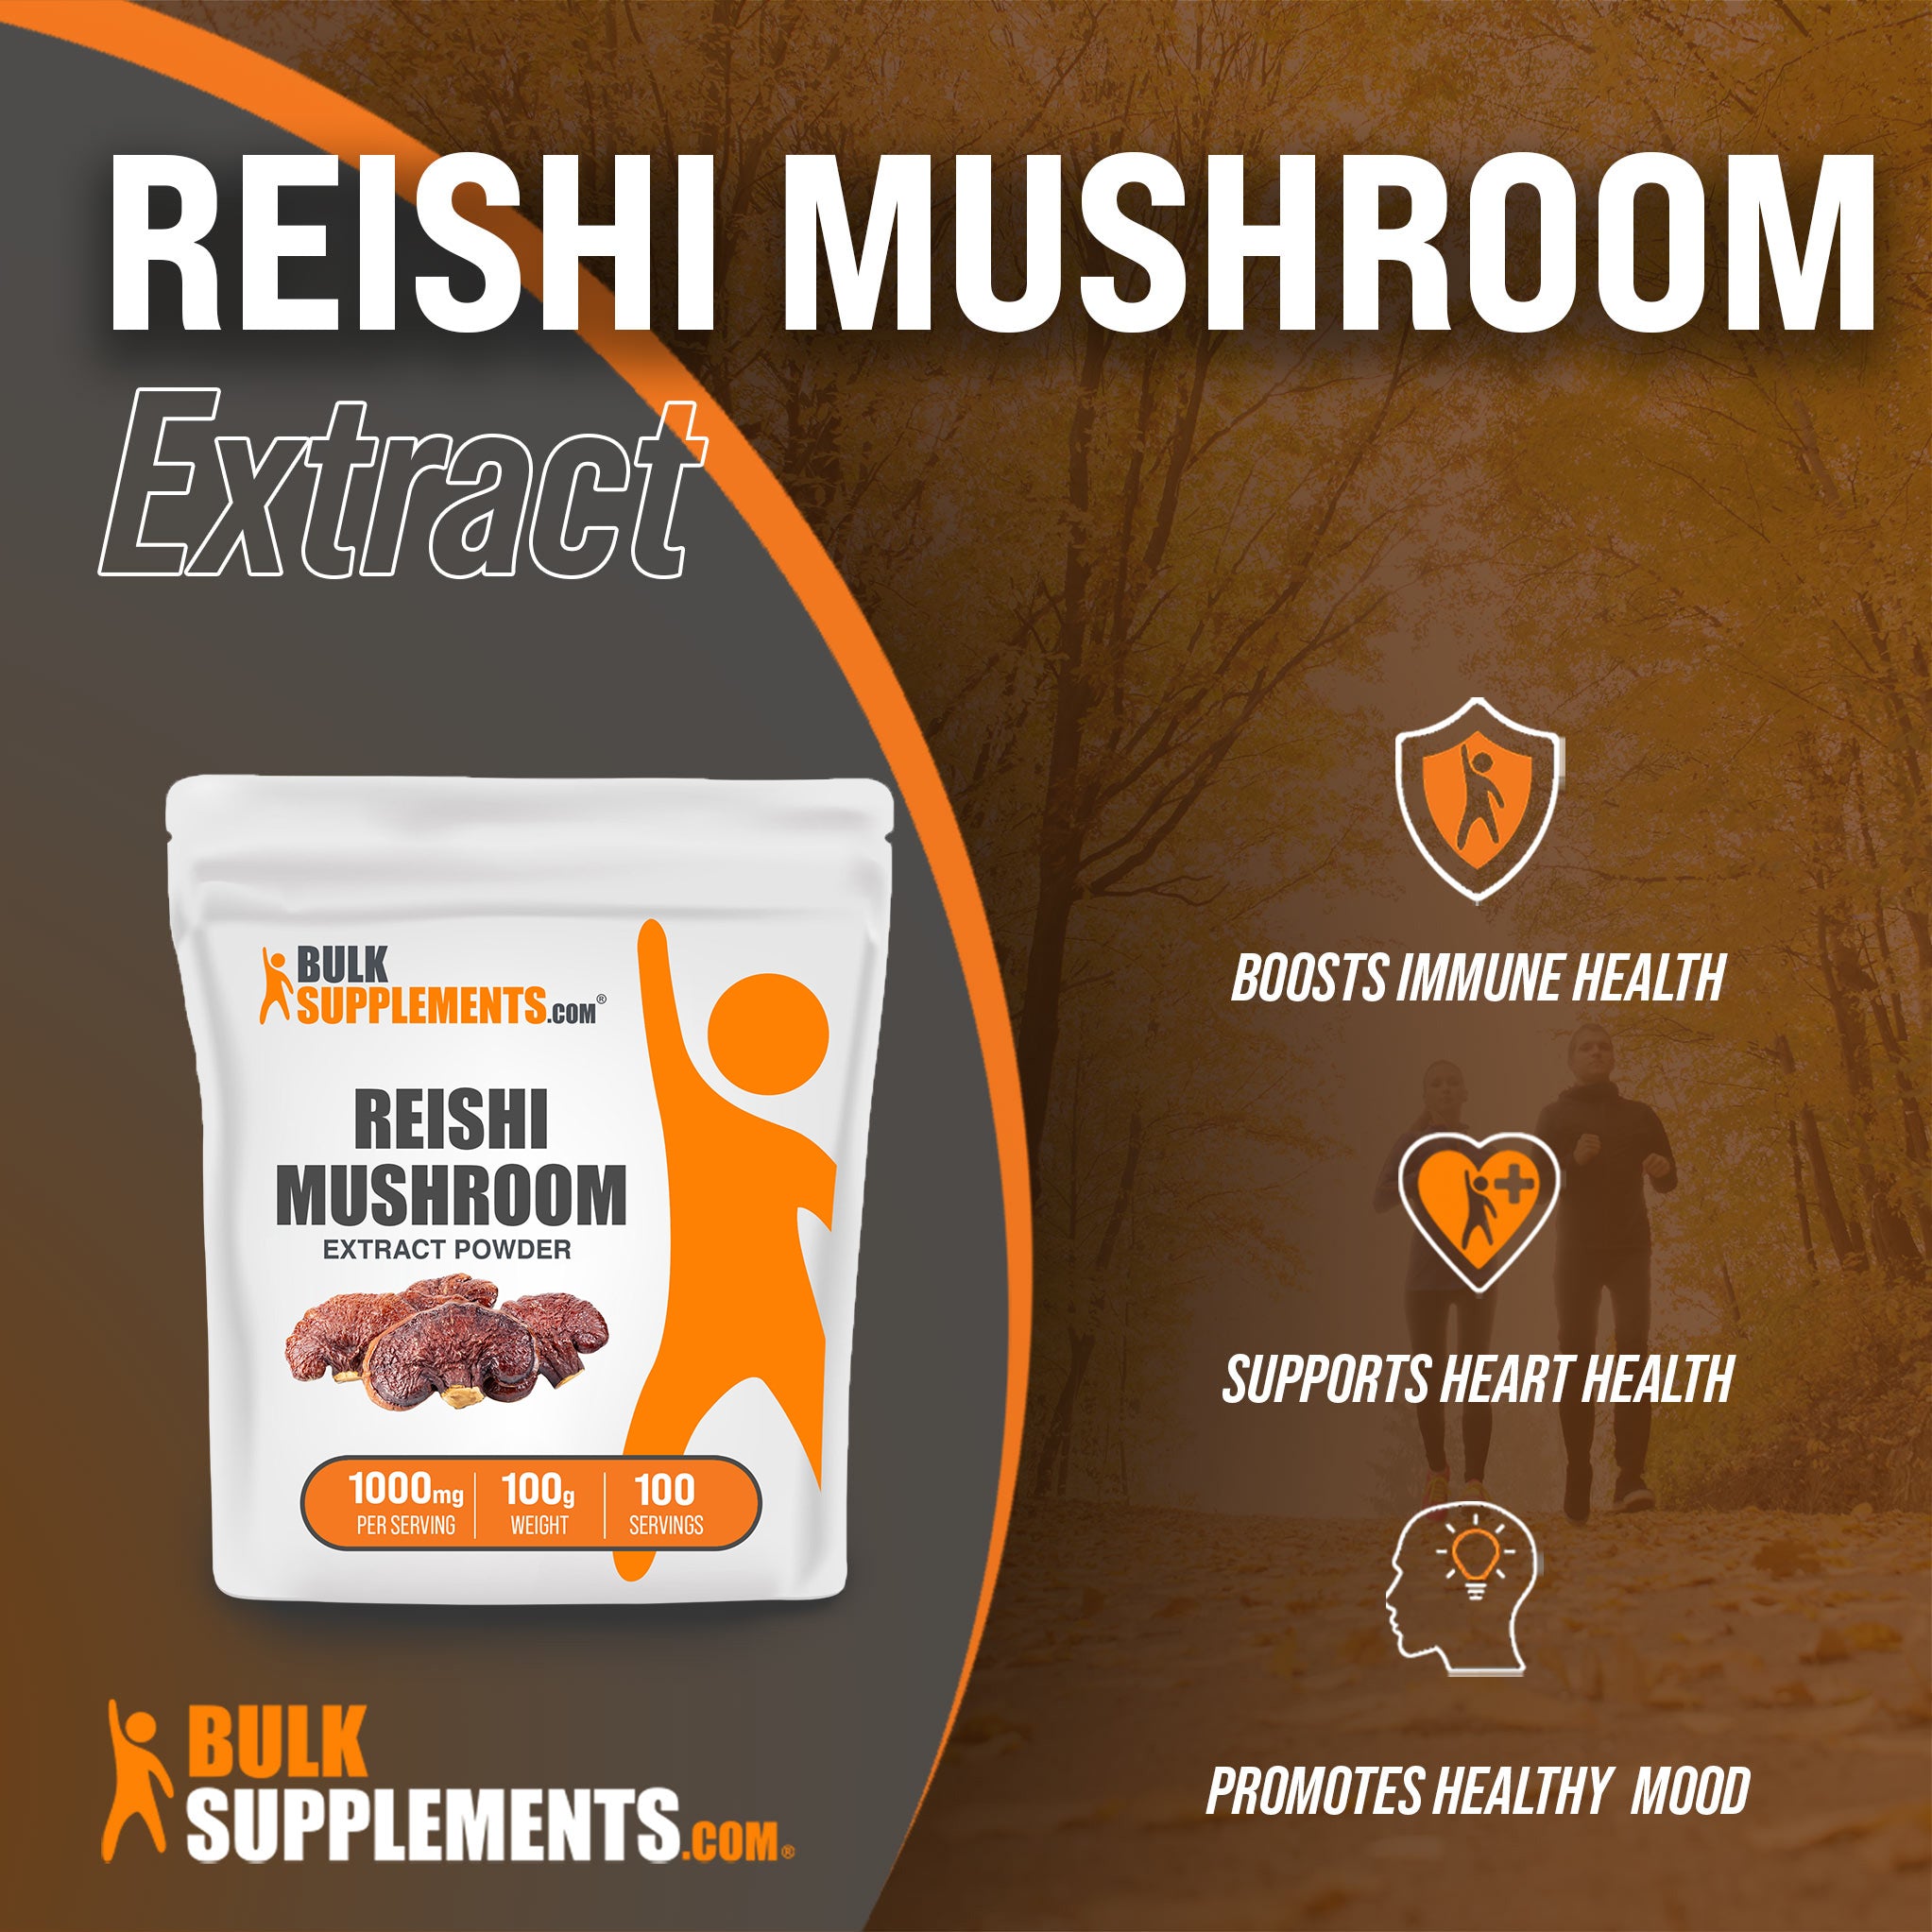 Benefits of Reishi Mushroom Extract: boosts immune health, supports heart health, promotes healthy mood